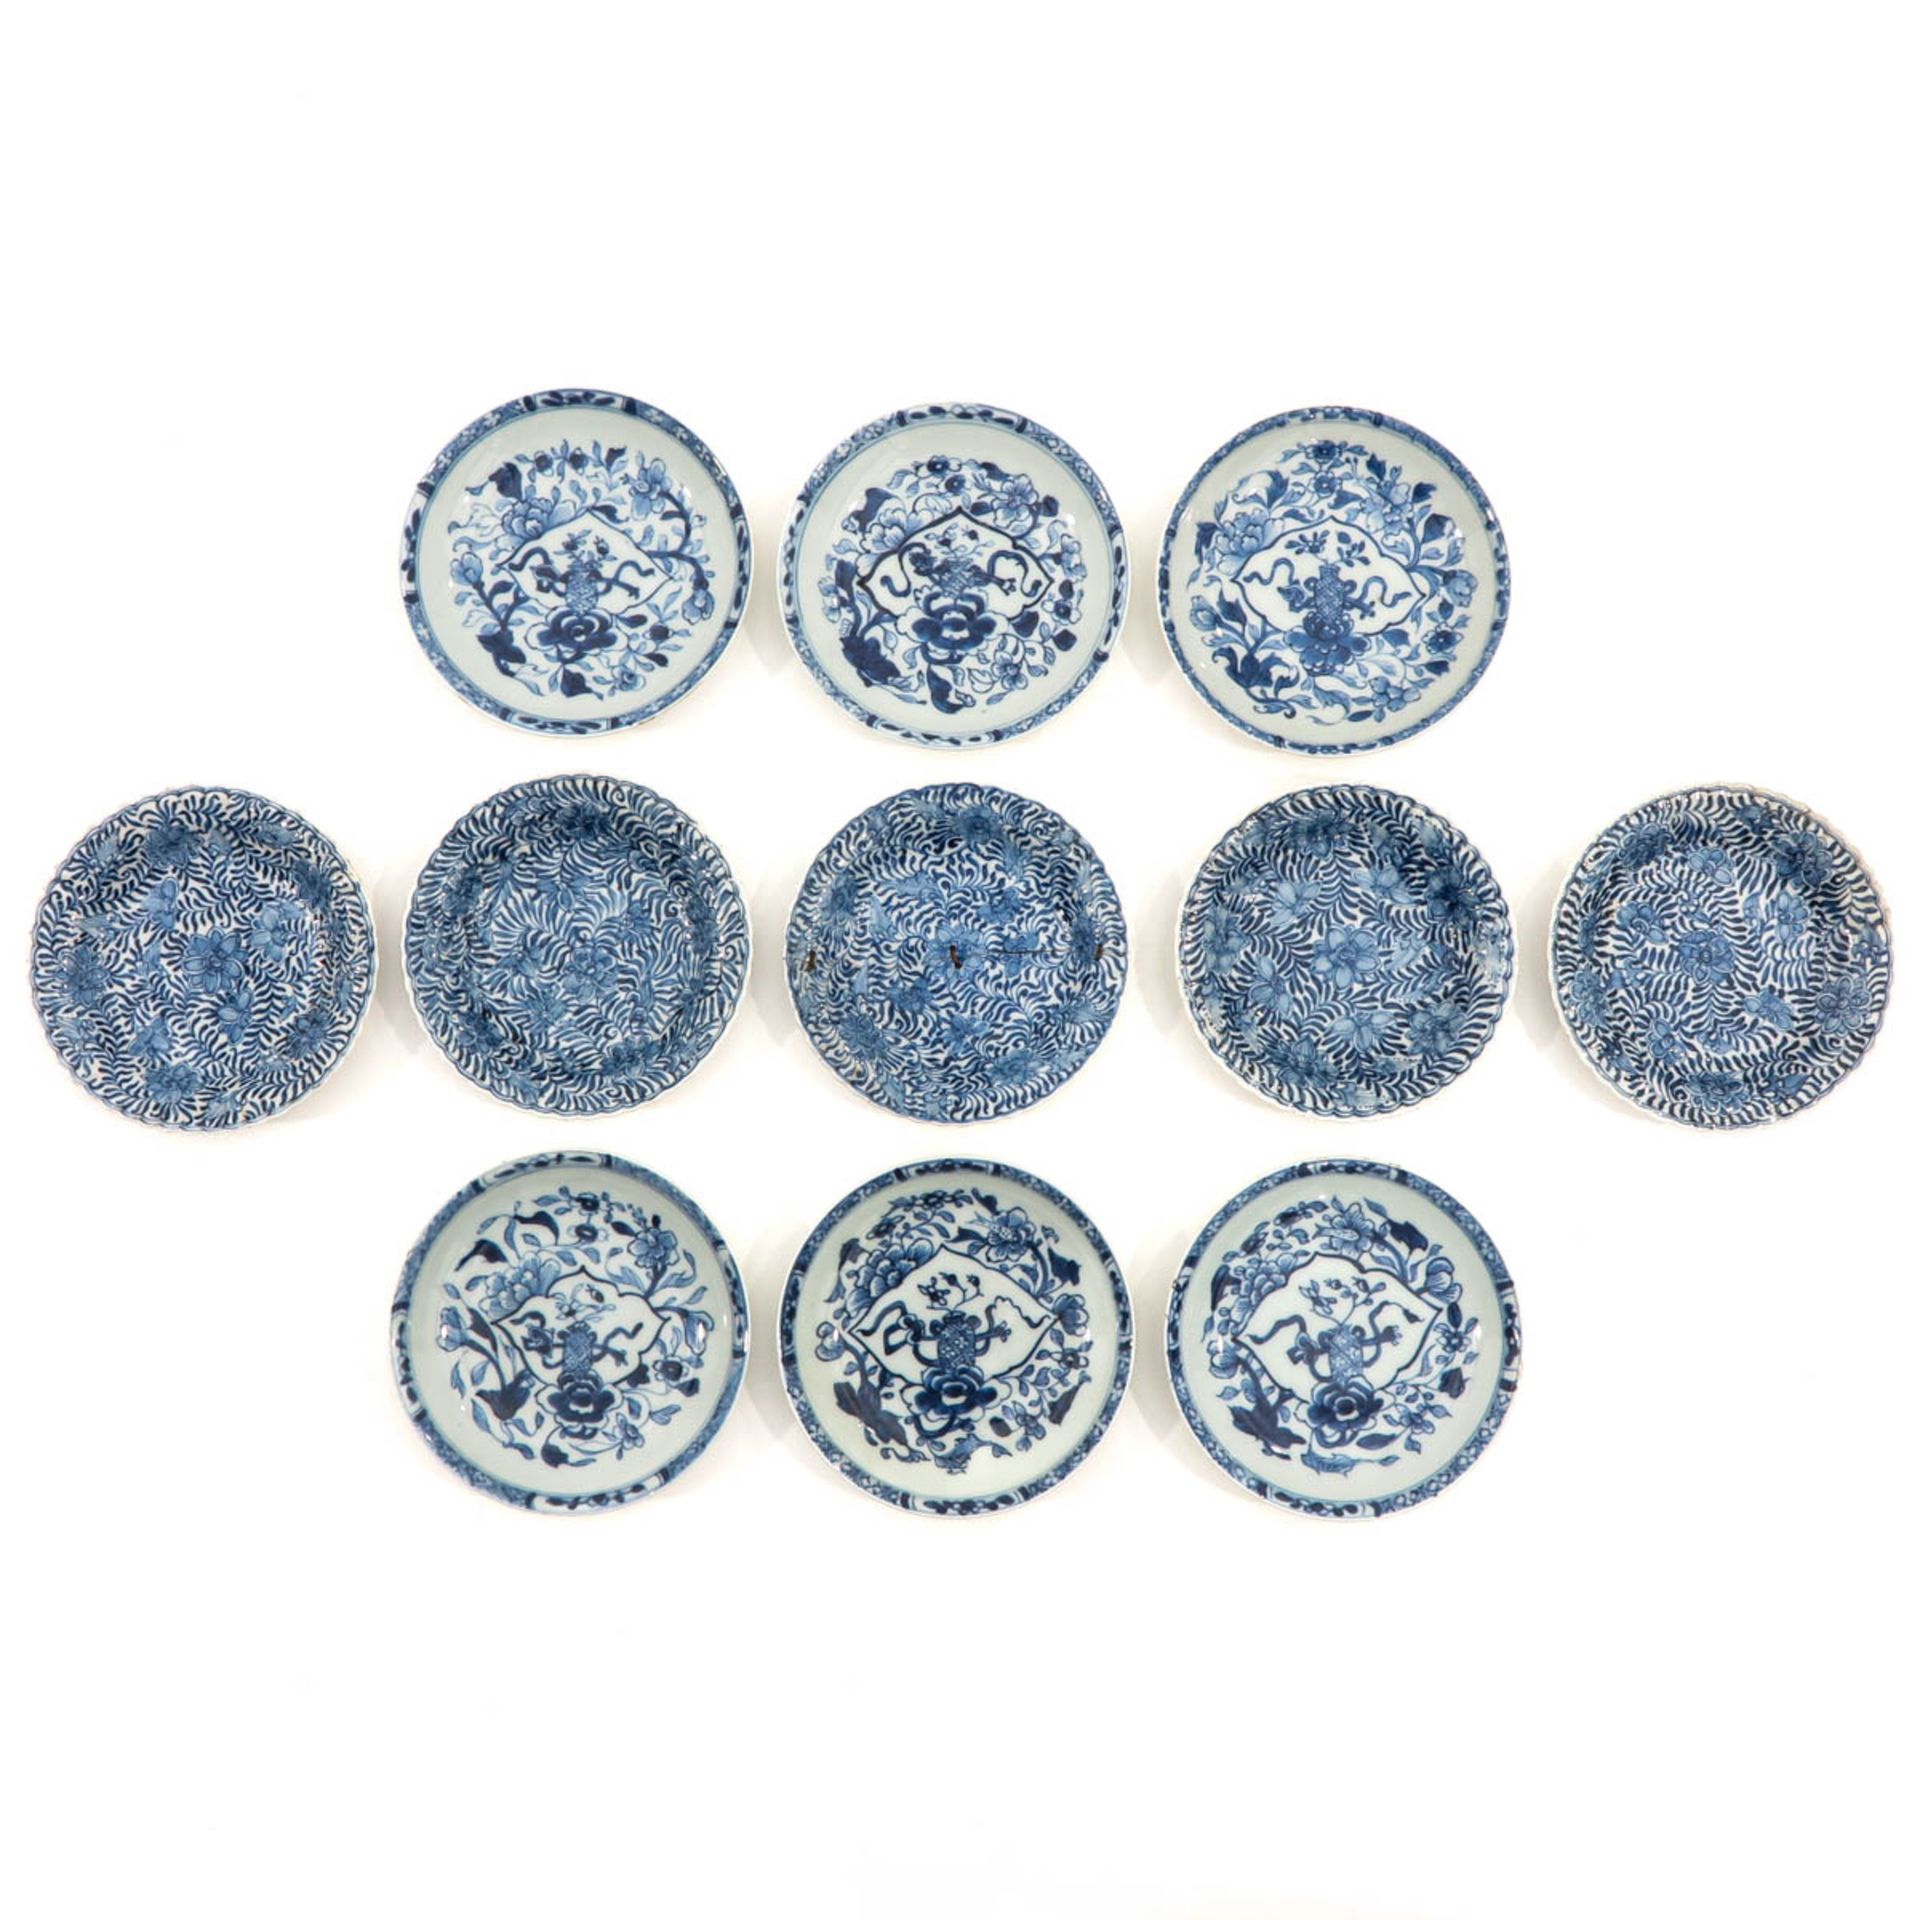 A Lot of 11 Small Blue and White Plates